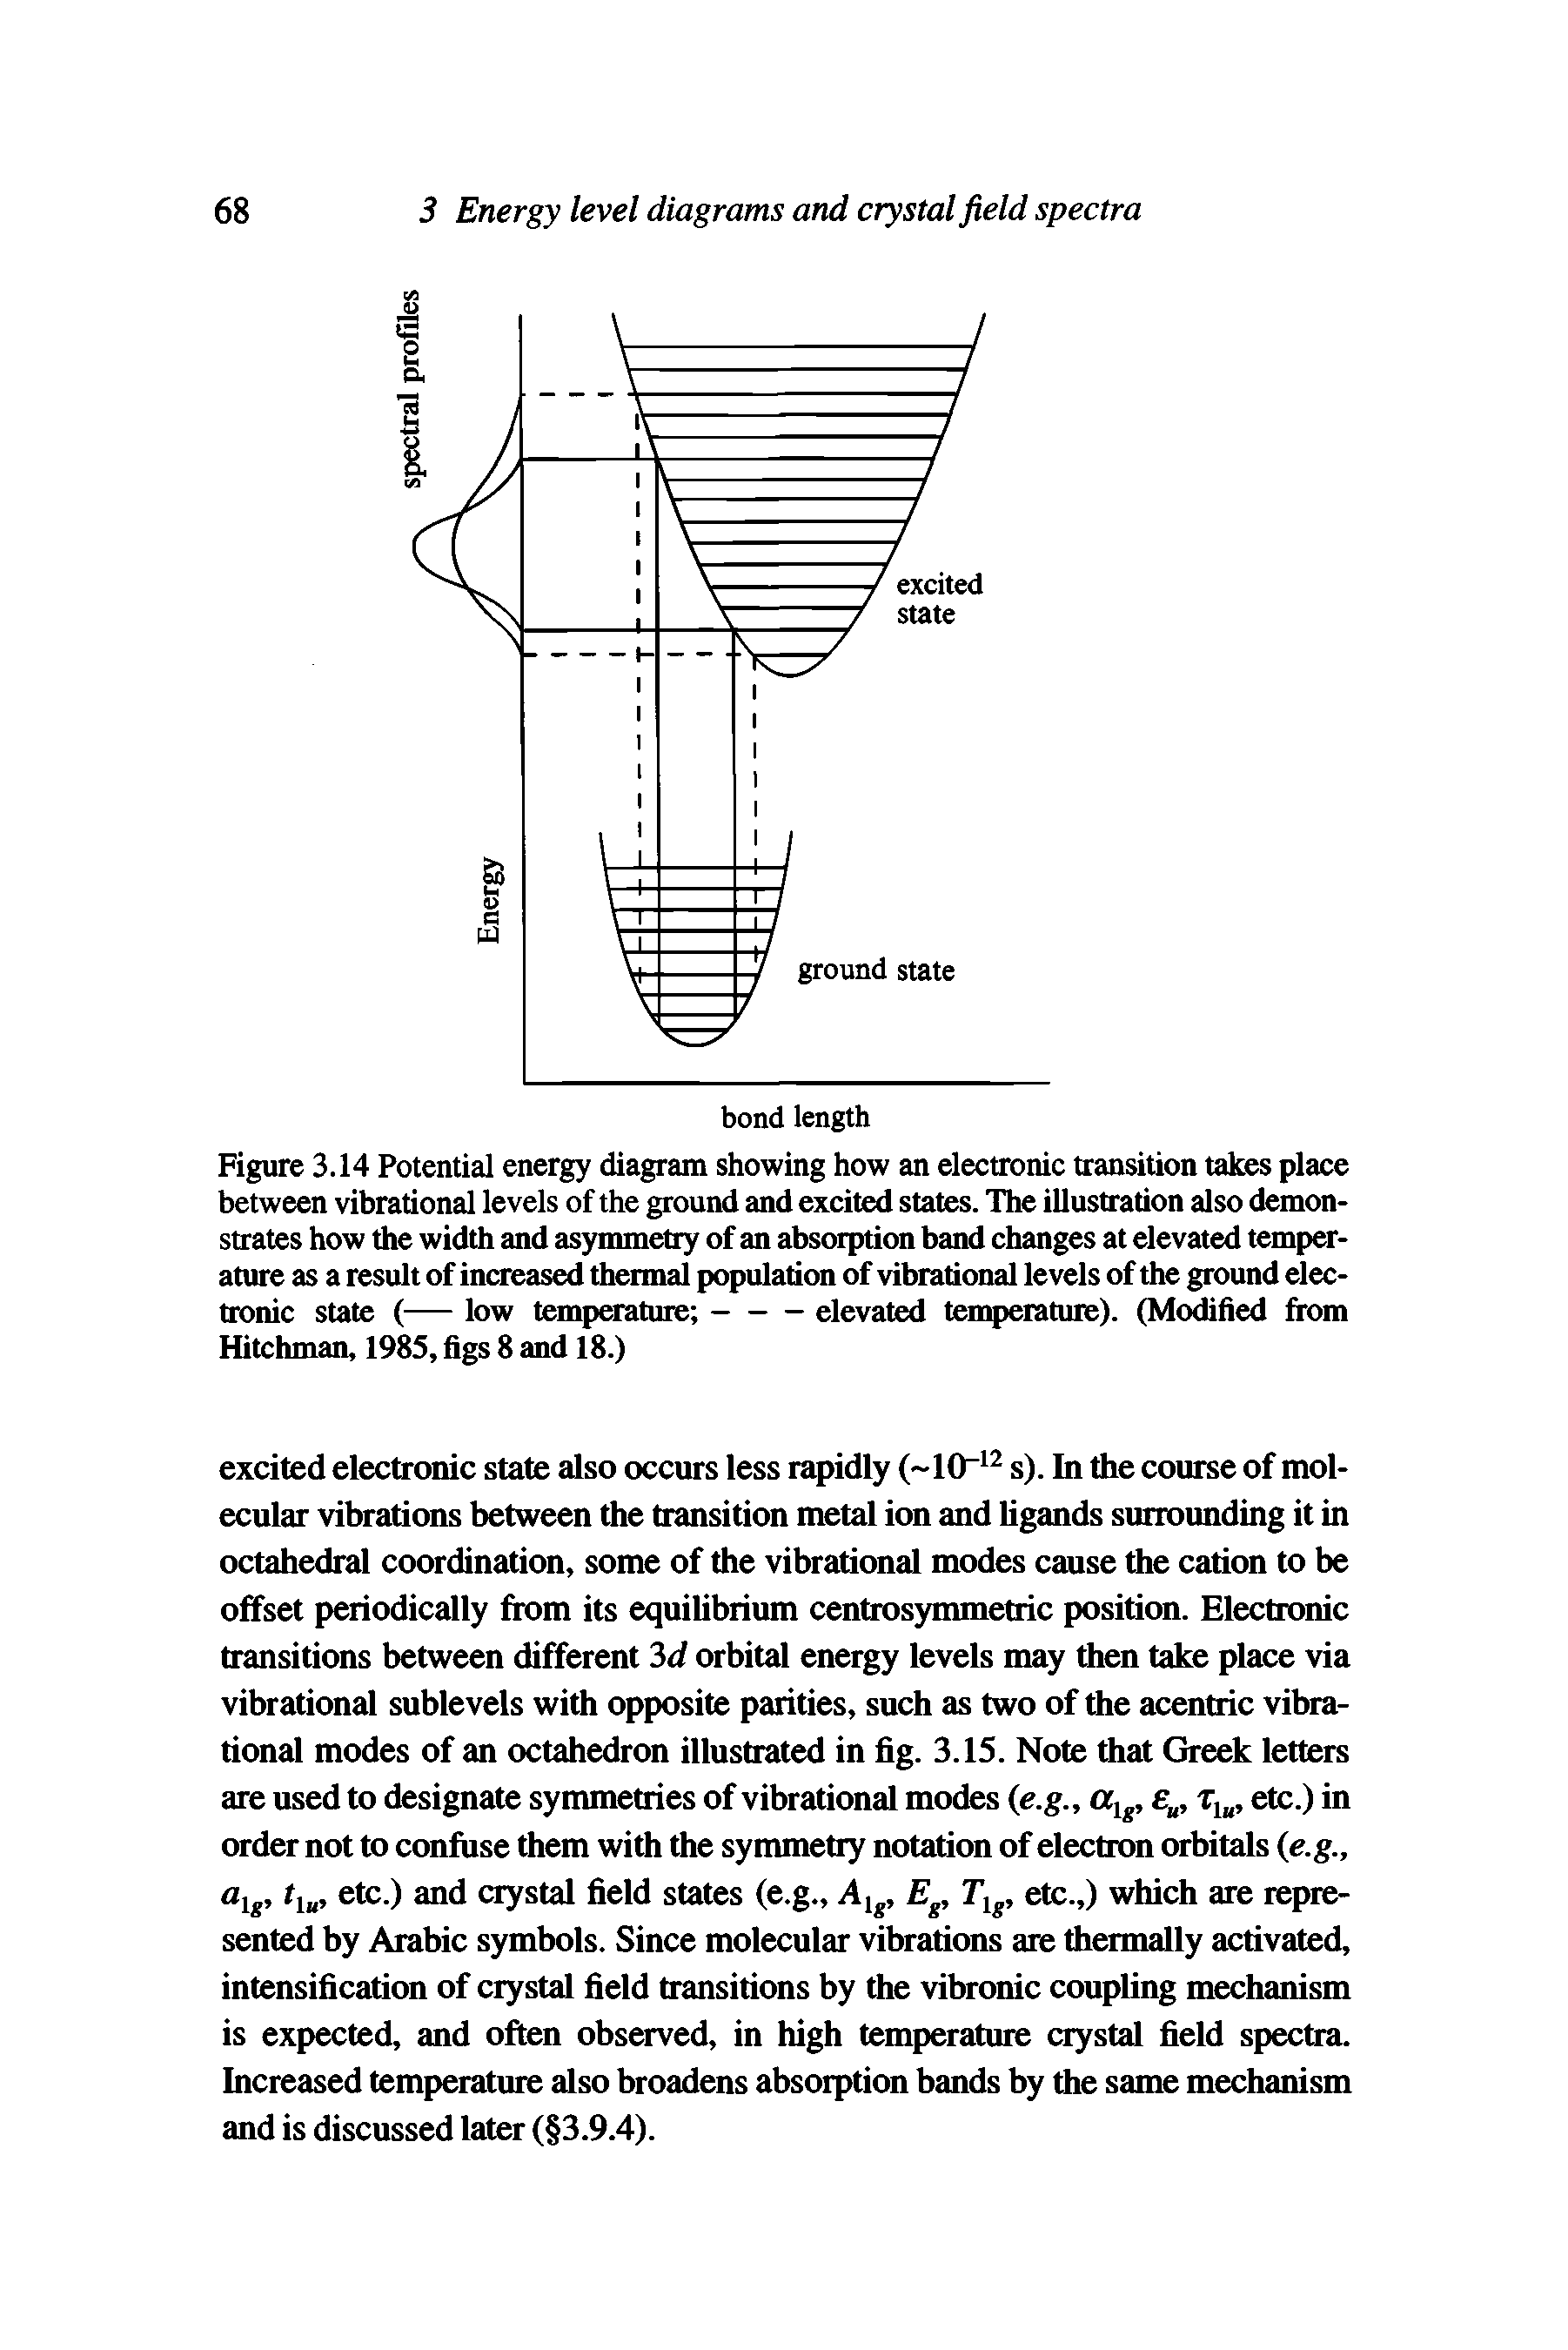 Figure 3.14 Potential energy diagram showing how an electronic transition takes place between vibrational levels of the ground and excited states. The illustration also demonstrates how the width and asymmetry of an absorption band changes at elevated temperature as a result of increased thermal population of vibrational levels of the ground electronic state (— low temperature -------elevated temperature). (Modified from...